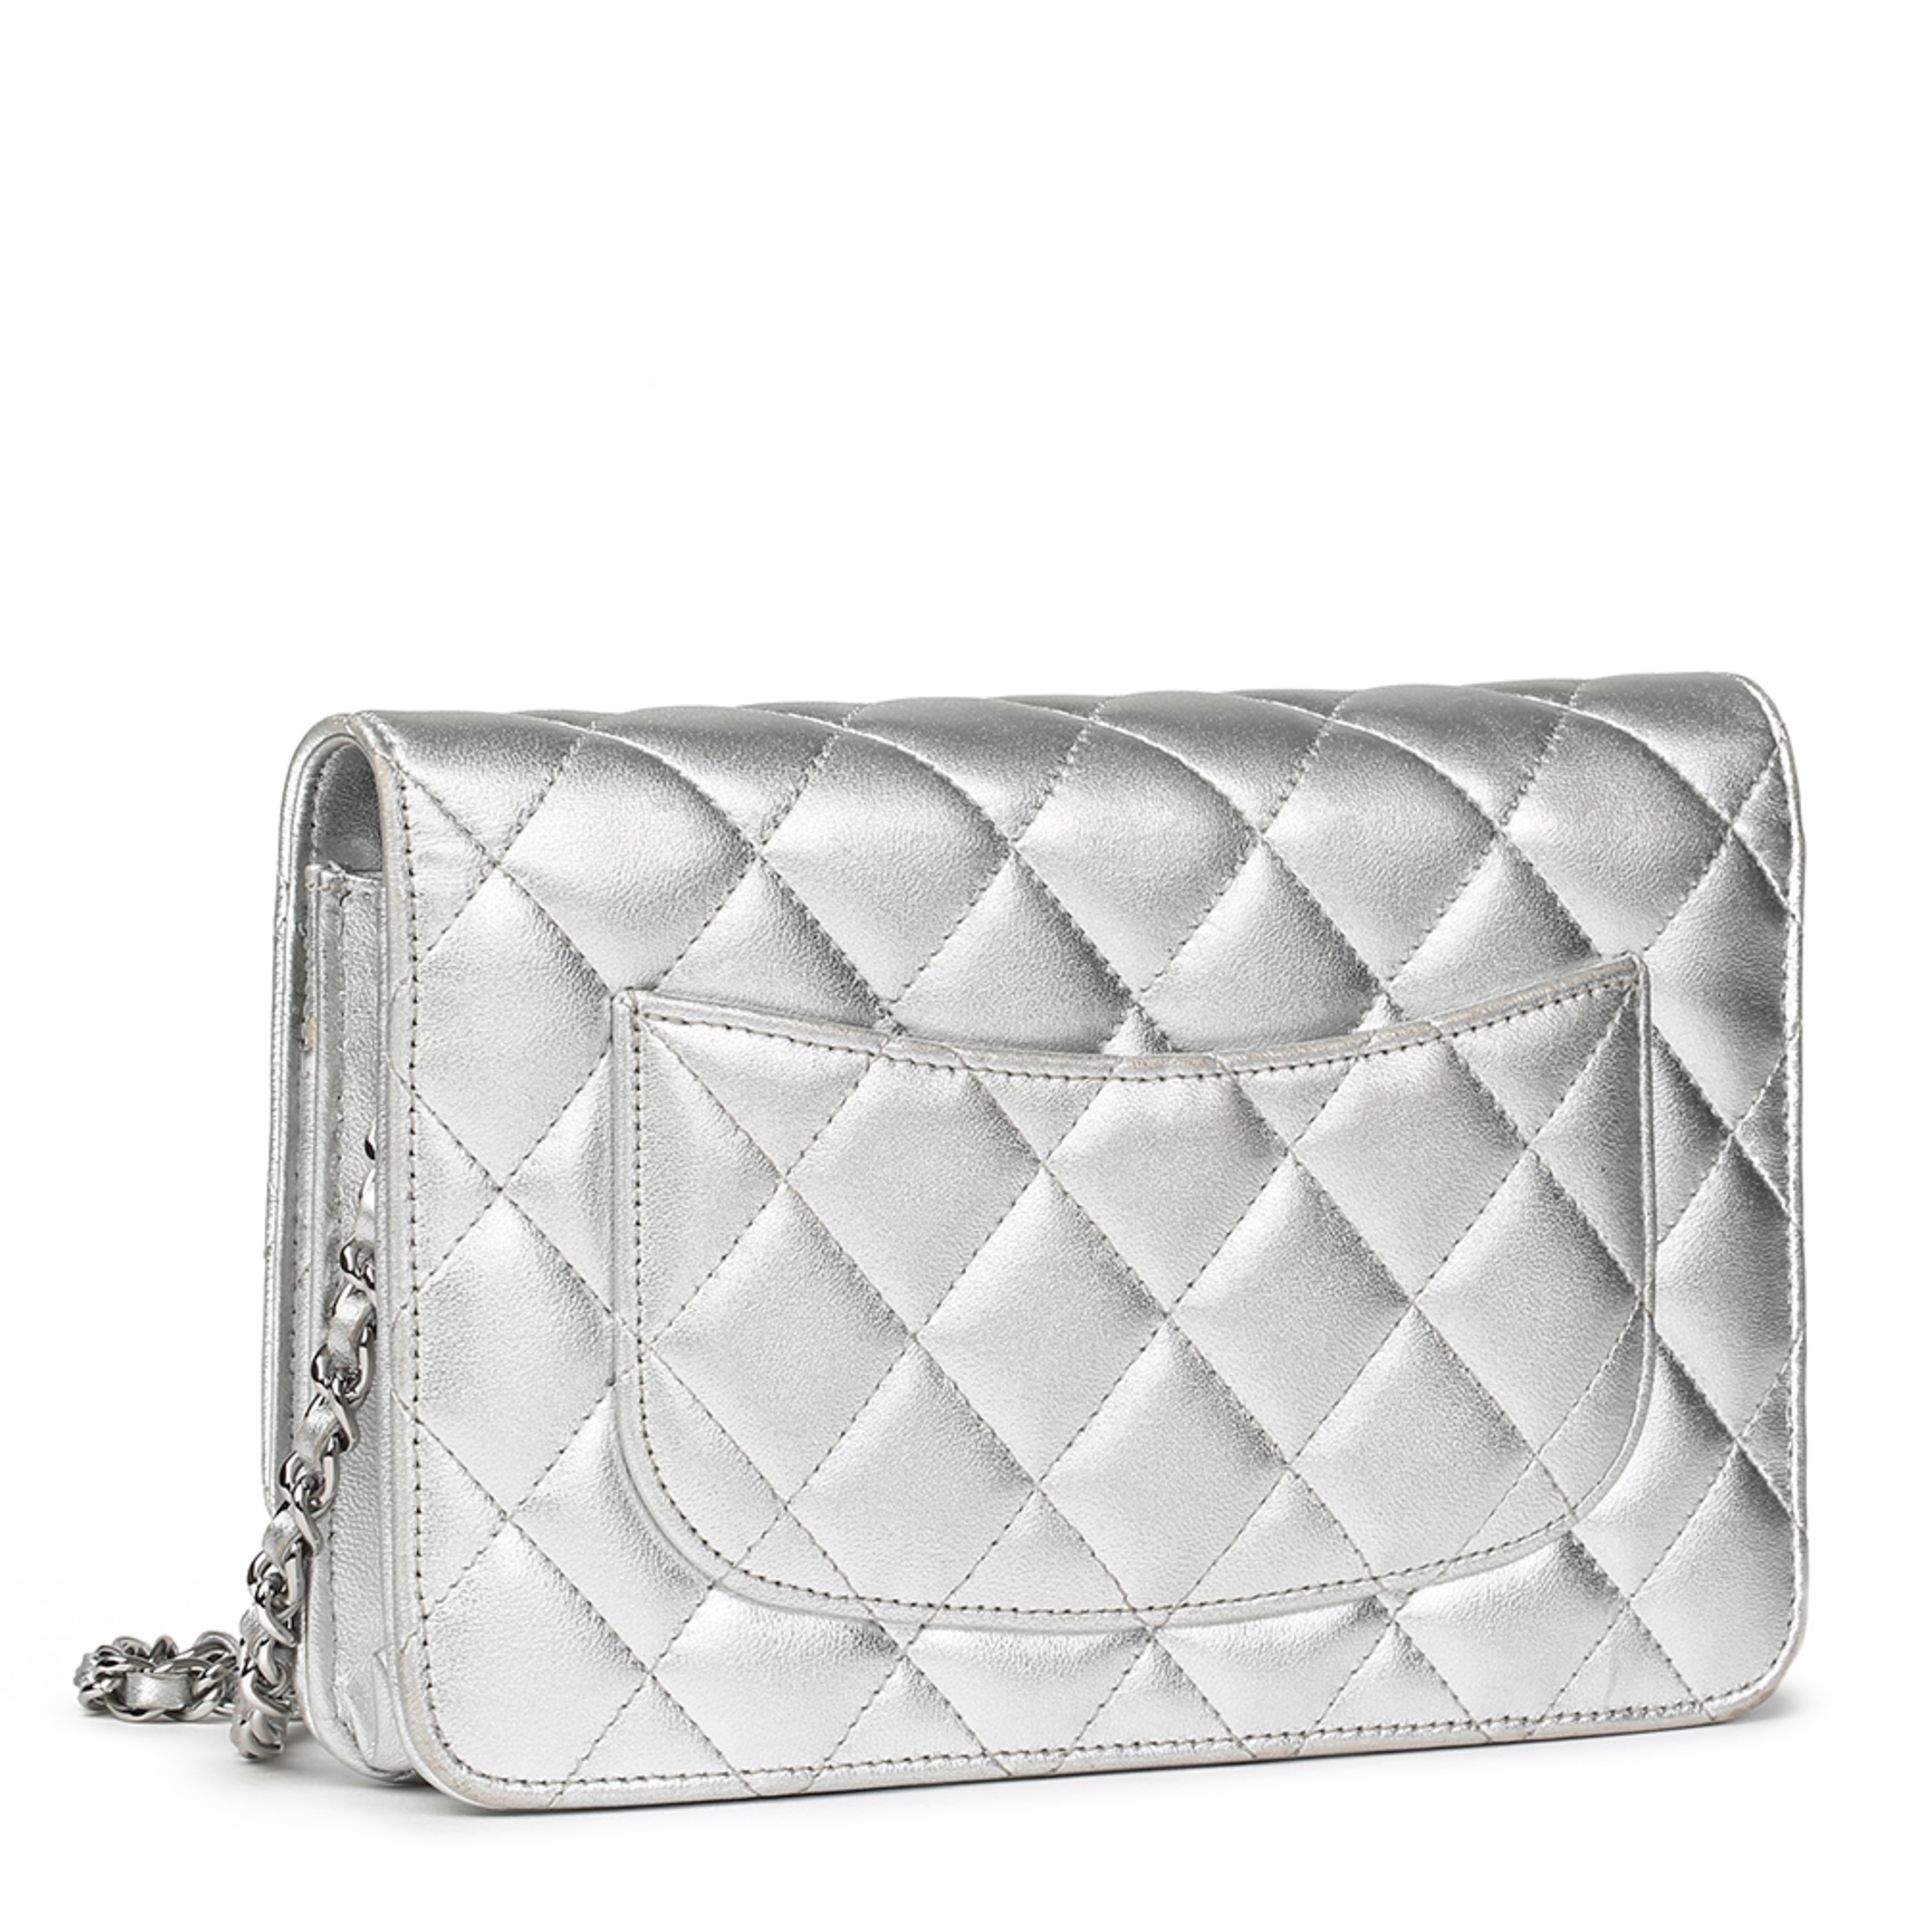 Chanel Silver Quilted Metallic Lambskin Wallet-On-Chain WOC - Image 3 of 11